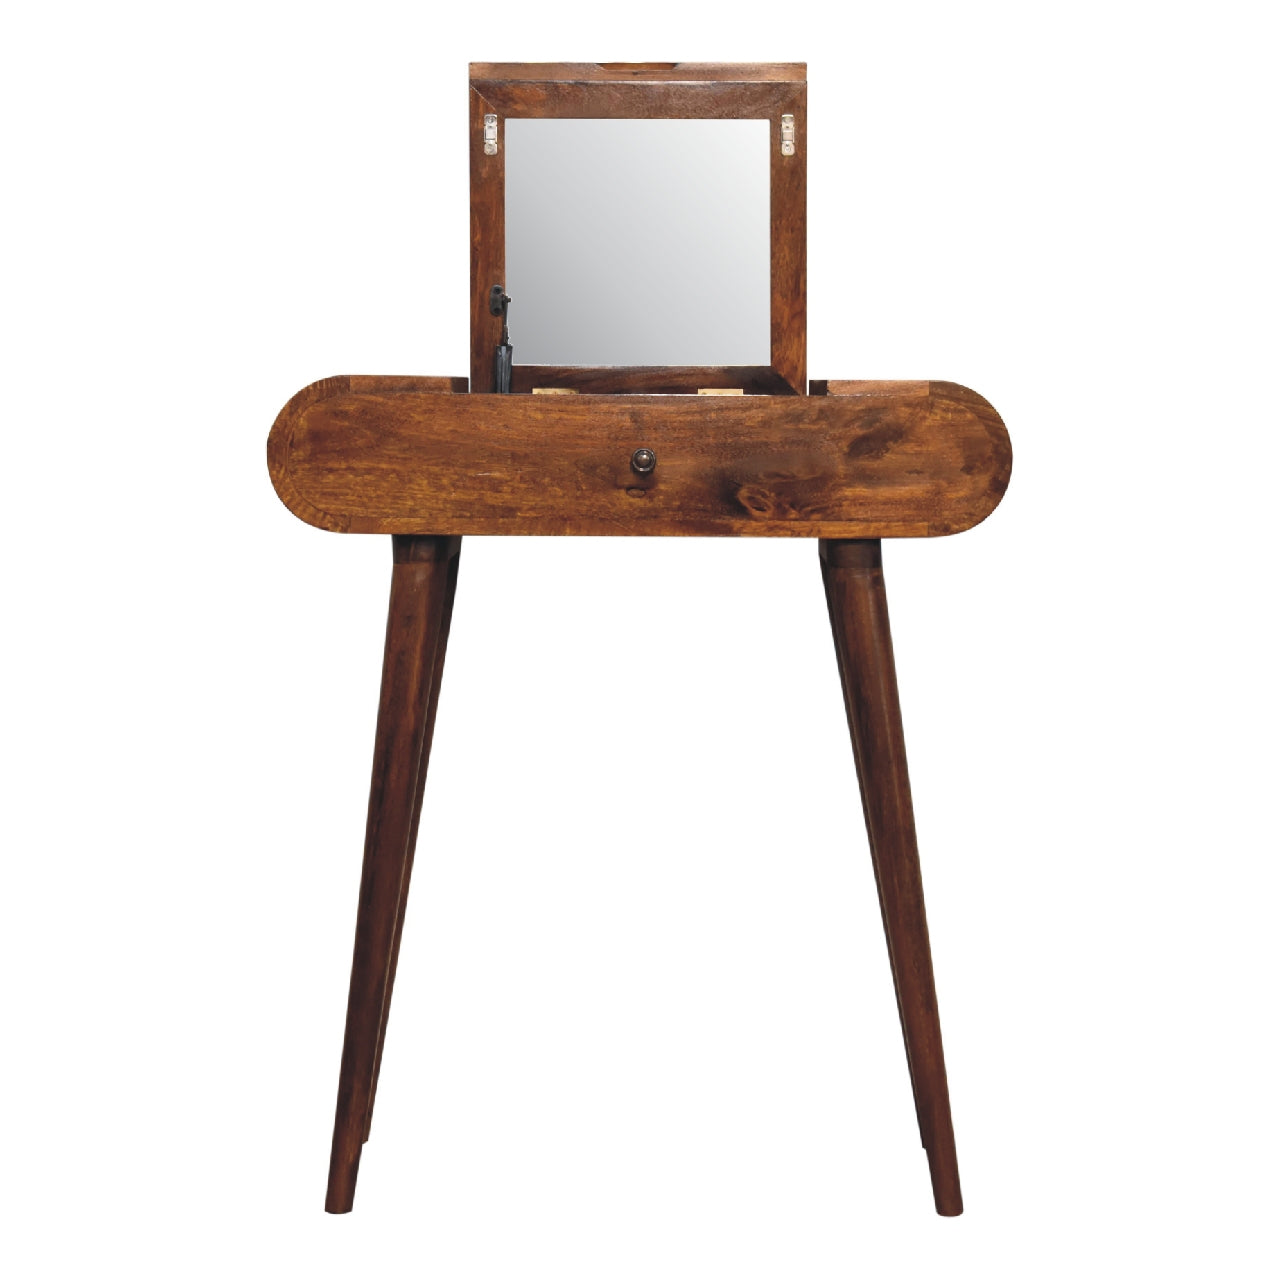 Mini Chestnut Dressing Table with Foldable Mirror - CasaFenix